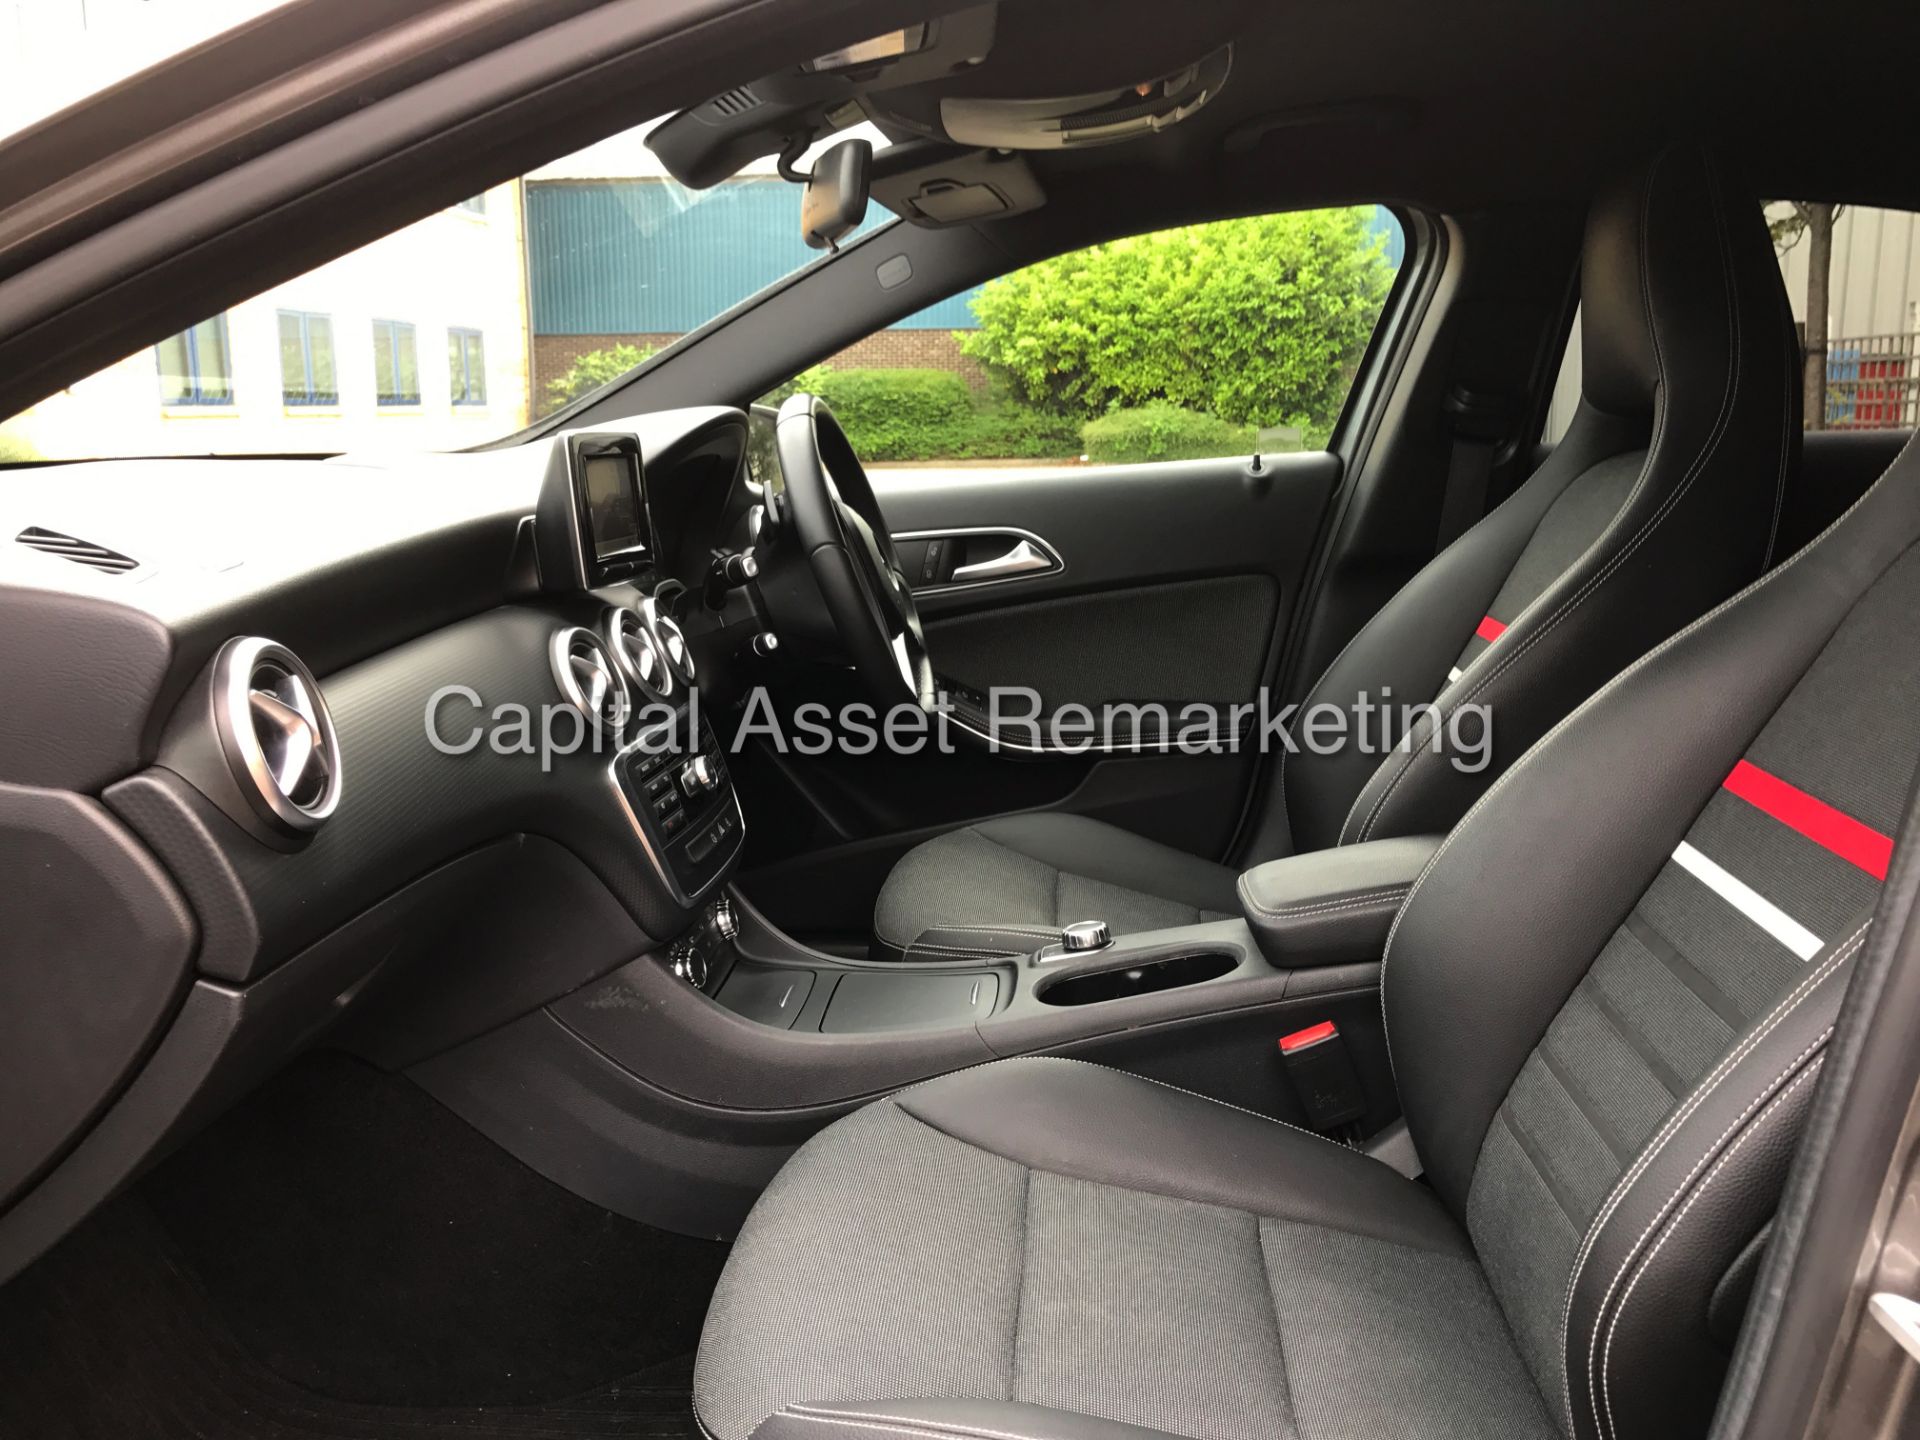 (ON SALE) MERCEDES A180d 7G TRONIC "15 REG" SAT NAV - 1 OWNER - PADDEL SHIFT - CRUISE - AIR CON - Image 13 of 22